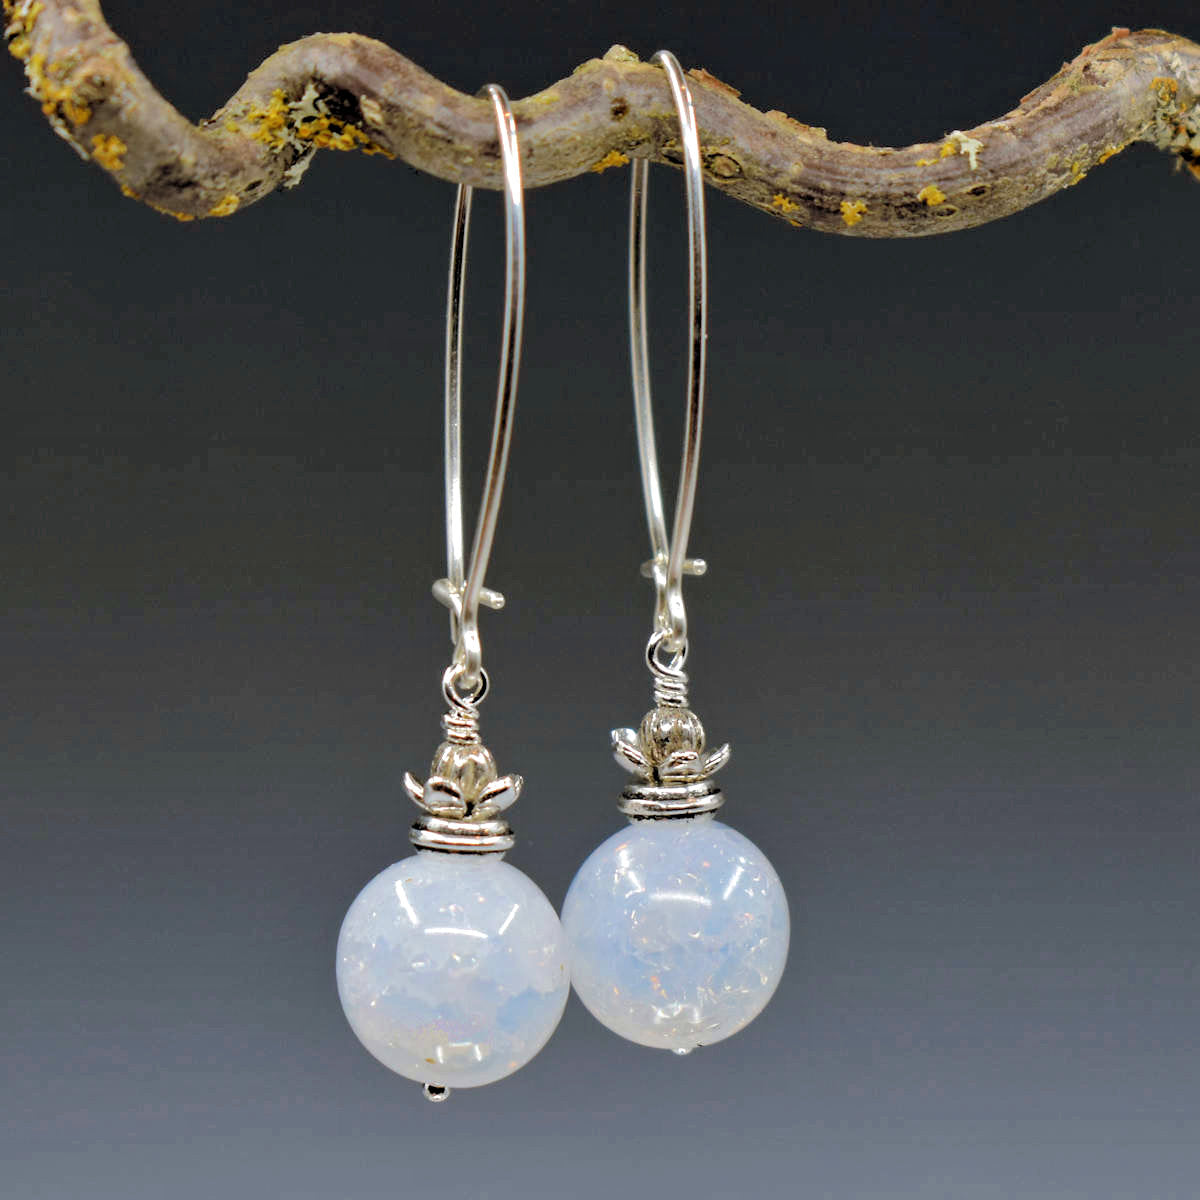 A pair of earrings hang from a twisty branch against a gray background. The earrings have long silver oval wires that latch and a drop that is formed from a milky white crackled round bead topped by a silver bead in a silver flower cup.